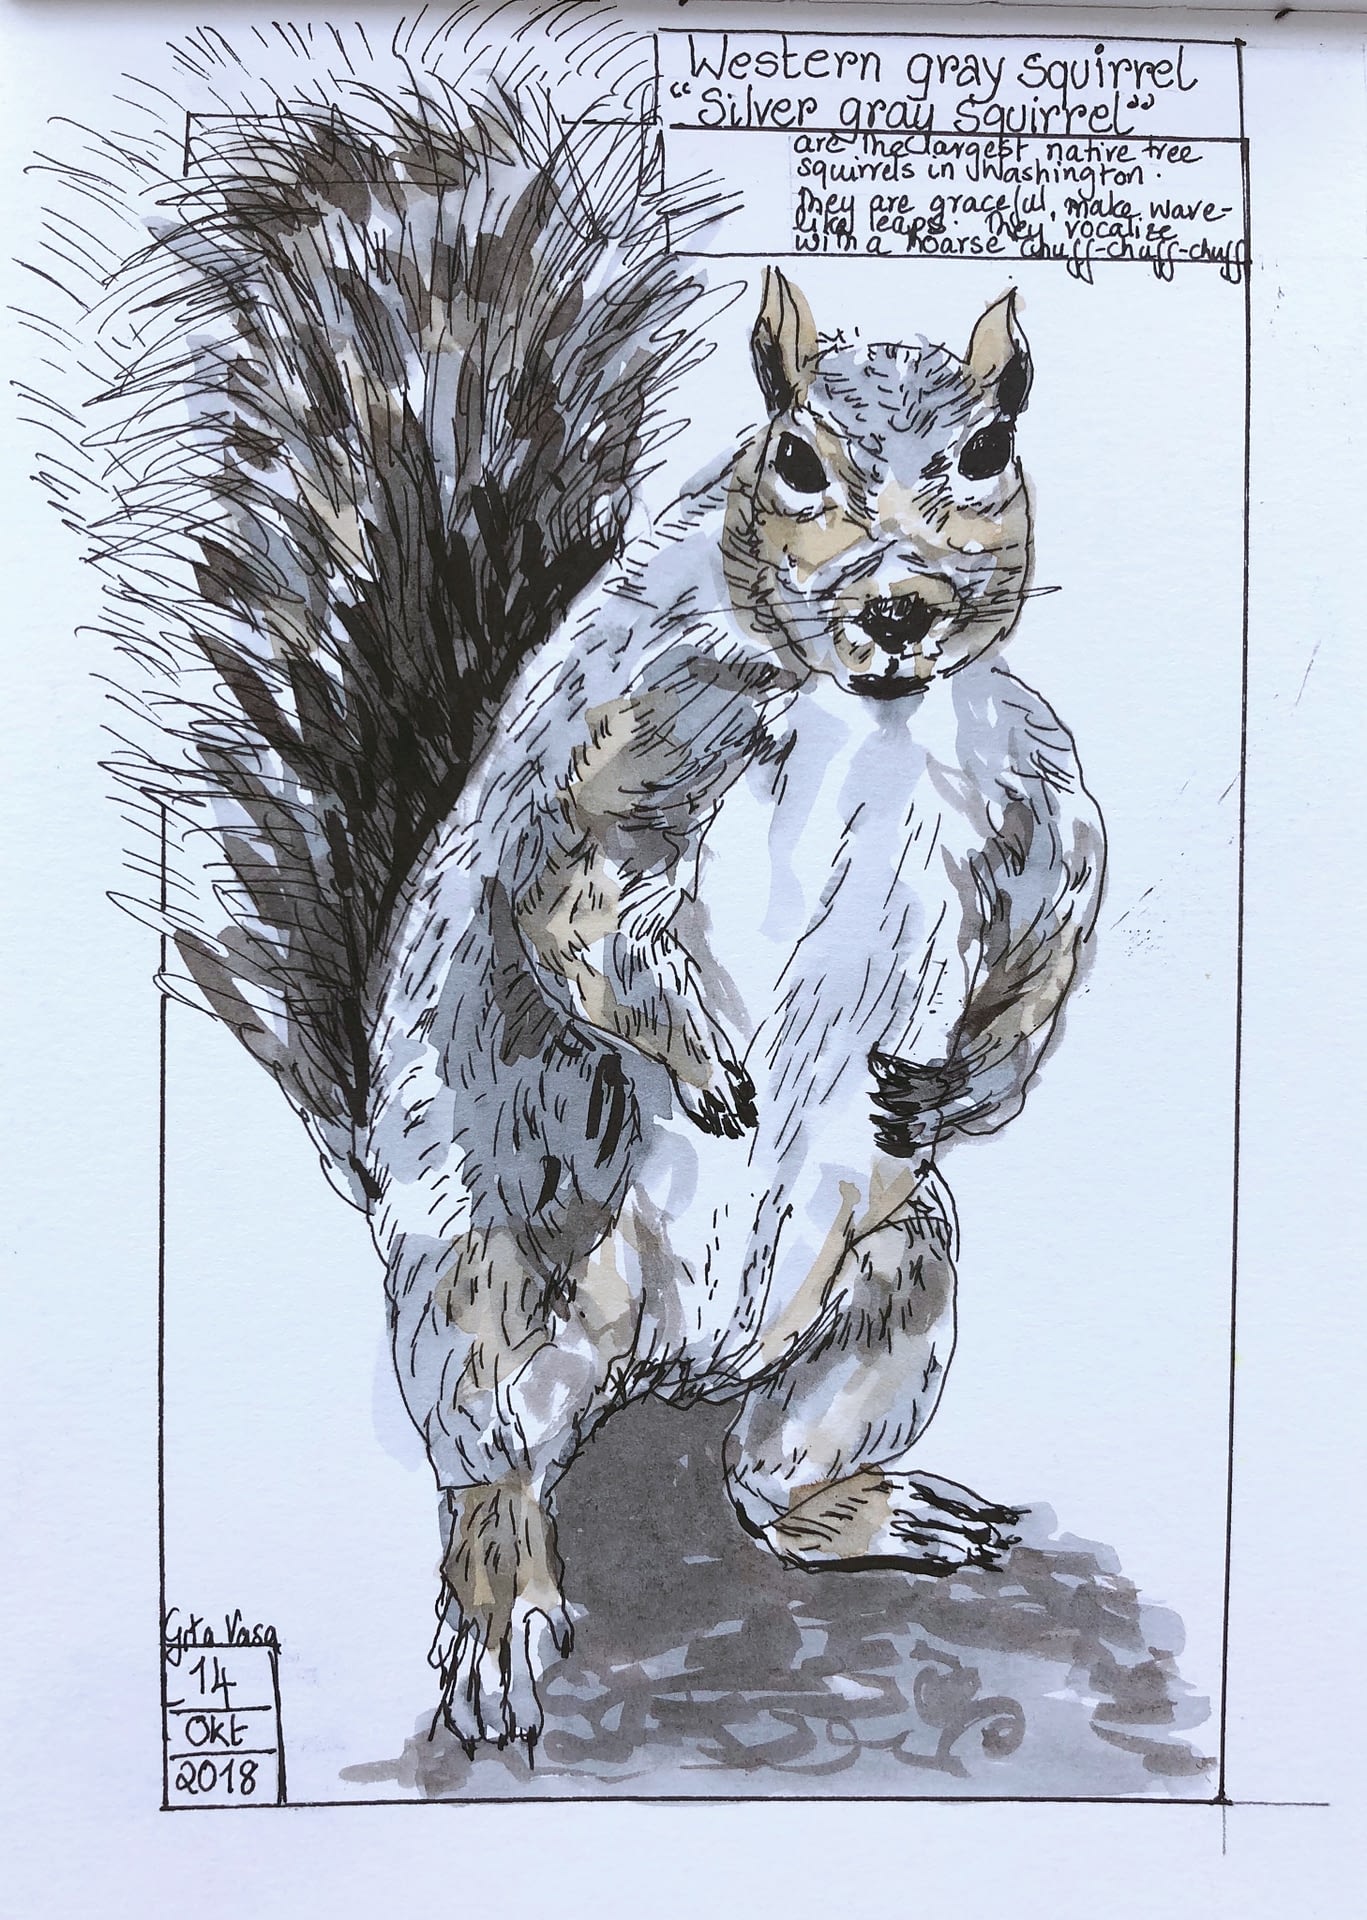 squirril in Washington - pen and ink wash